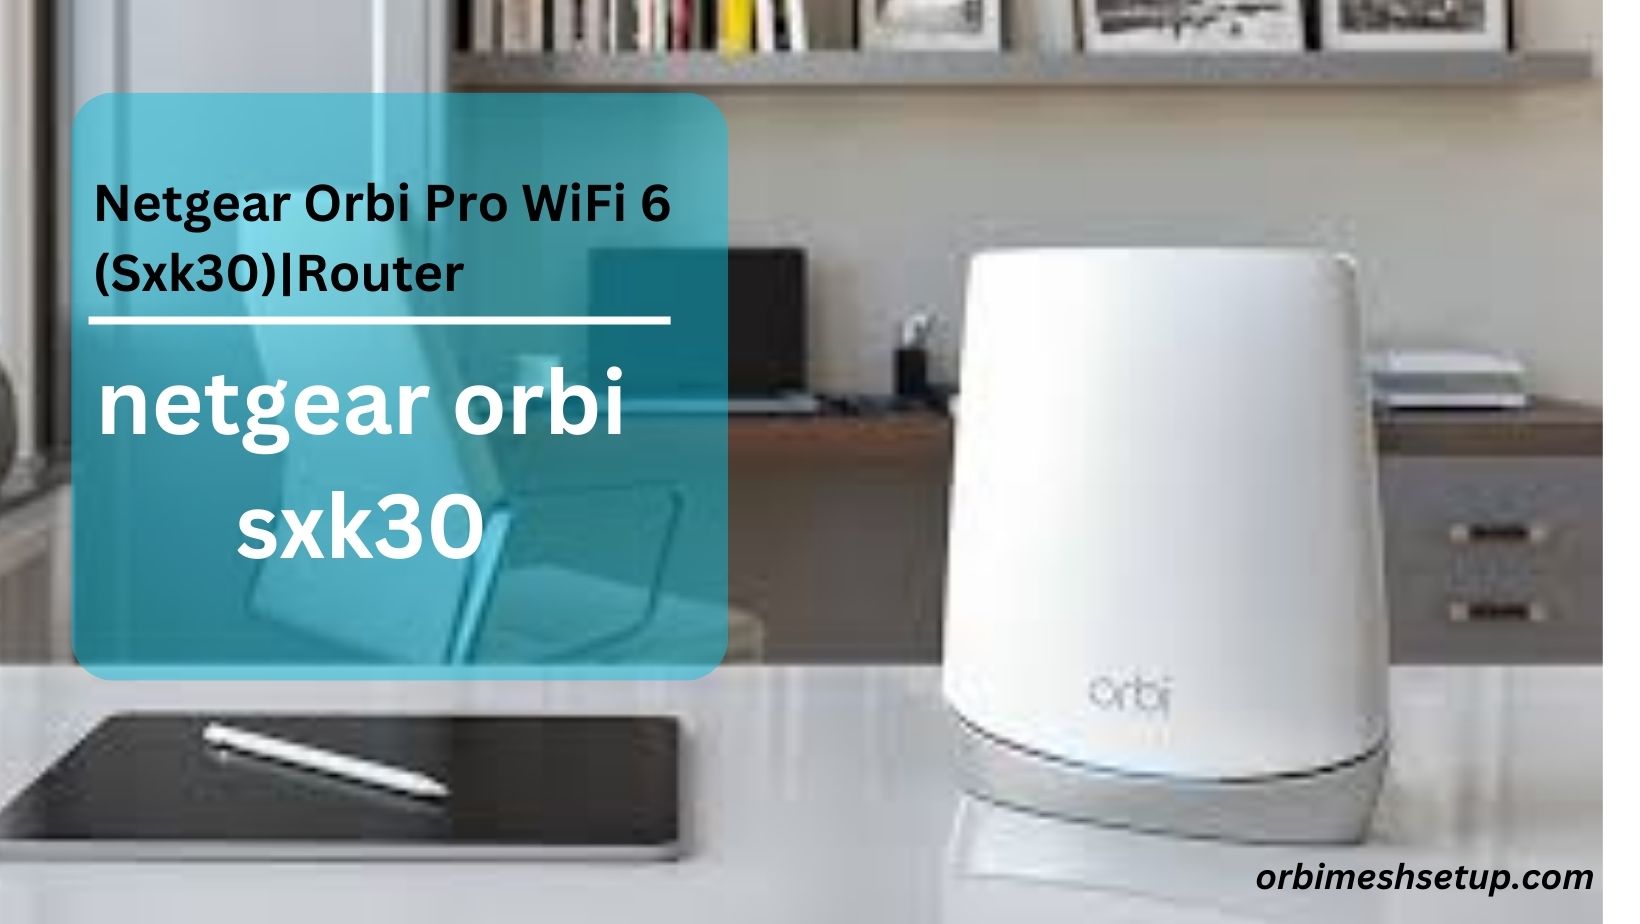 You are currently viewing Netgear Orbi Pro WiFi 6 (Sxk30)|Router